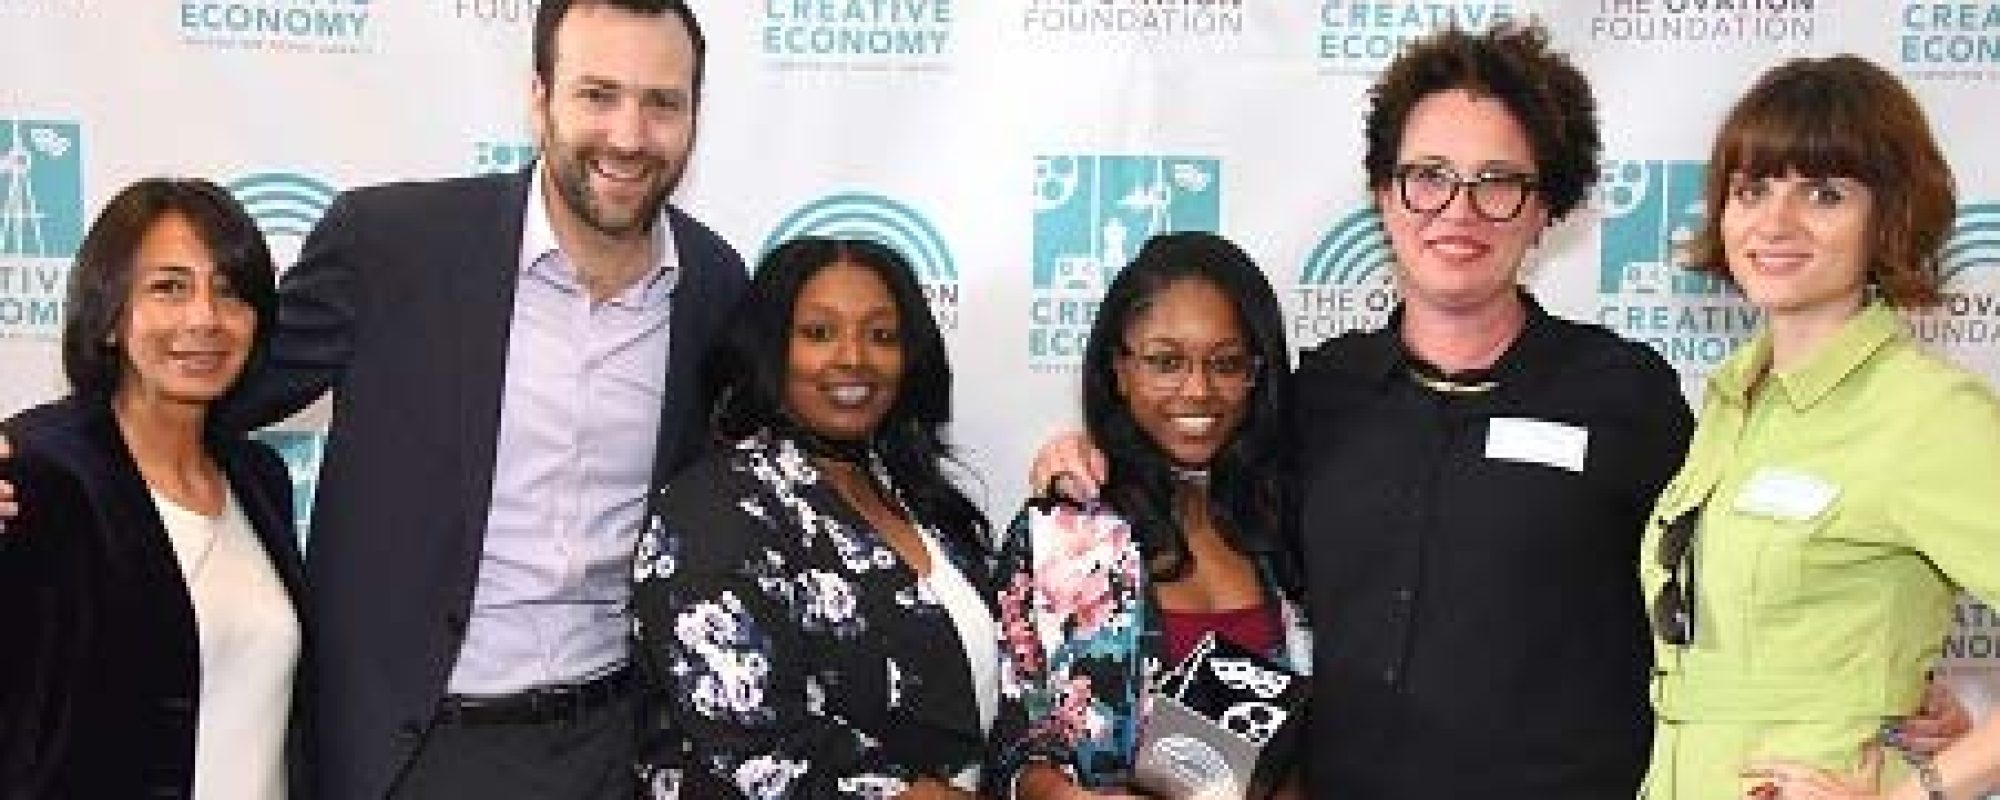 THE OVATION FOUNDATION CELEBRATES ACHIEVEMENTS OF FIVE CREATIVE ECONOMY INNOVATION GRANT RECIPIENTS AT AWARDS CEREMONY